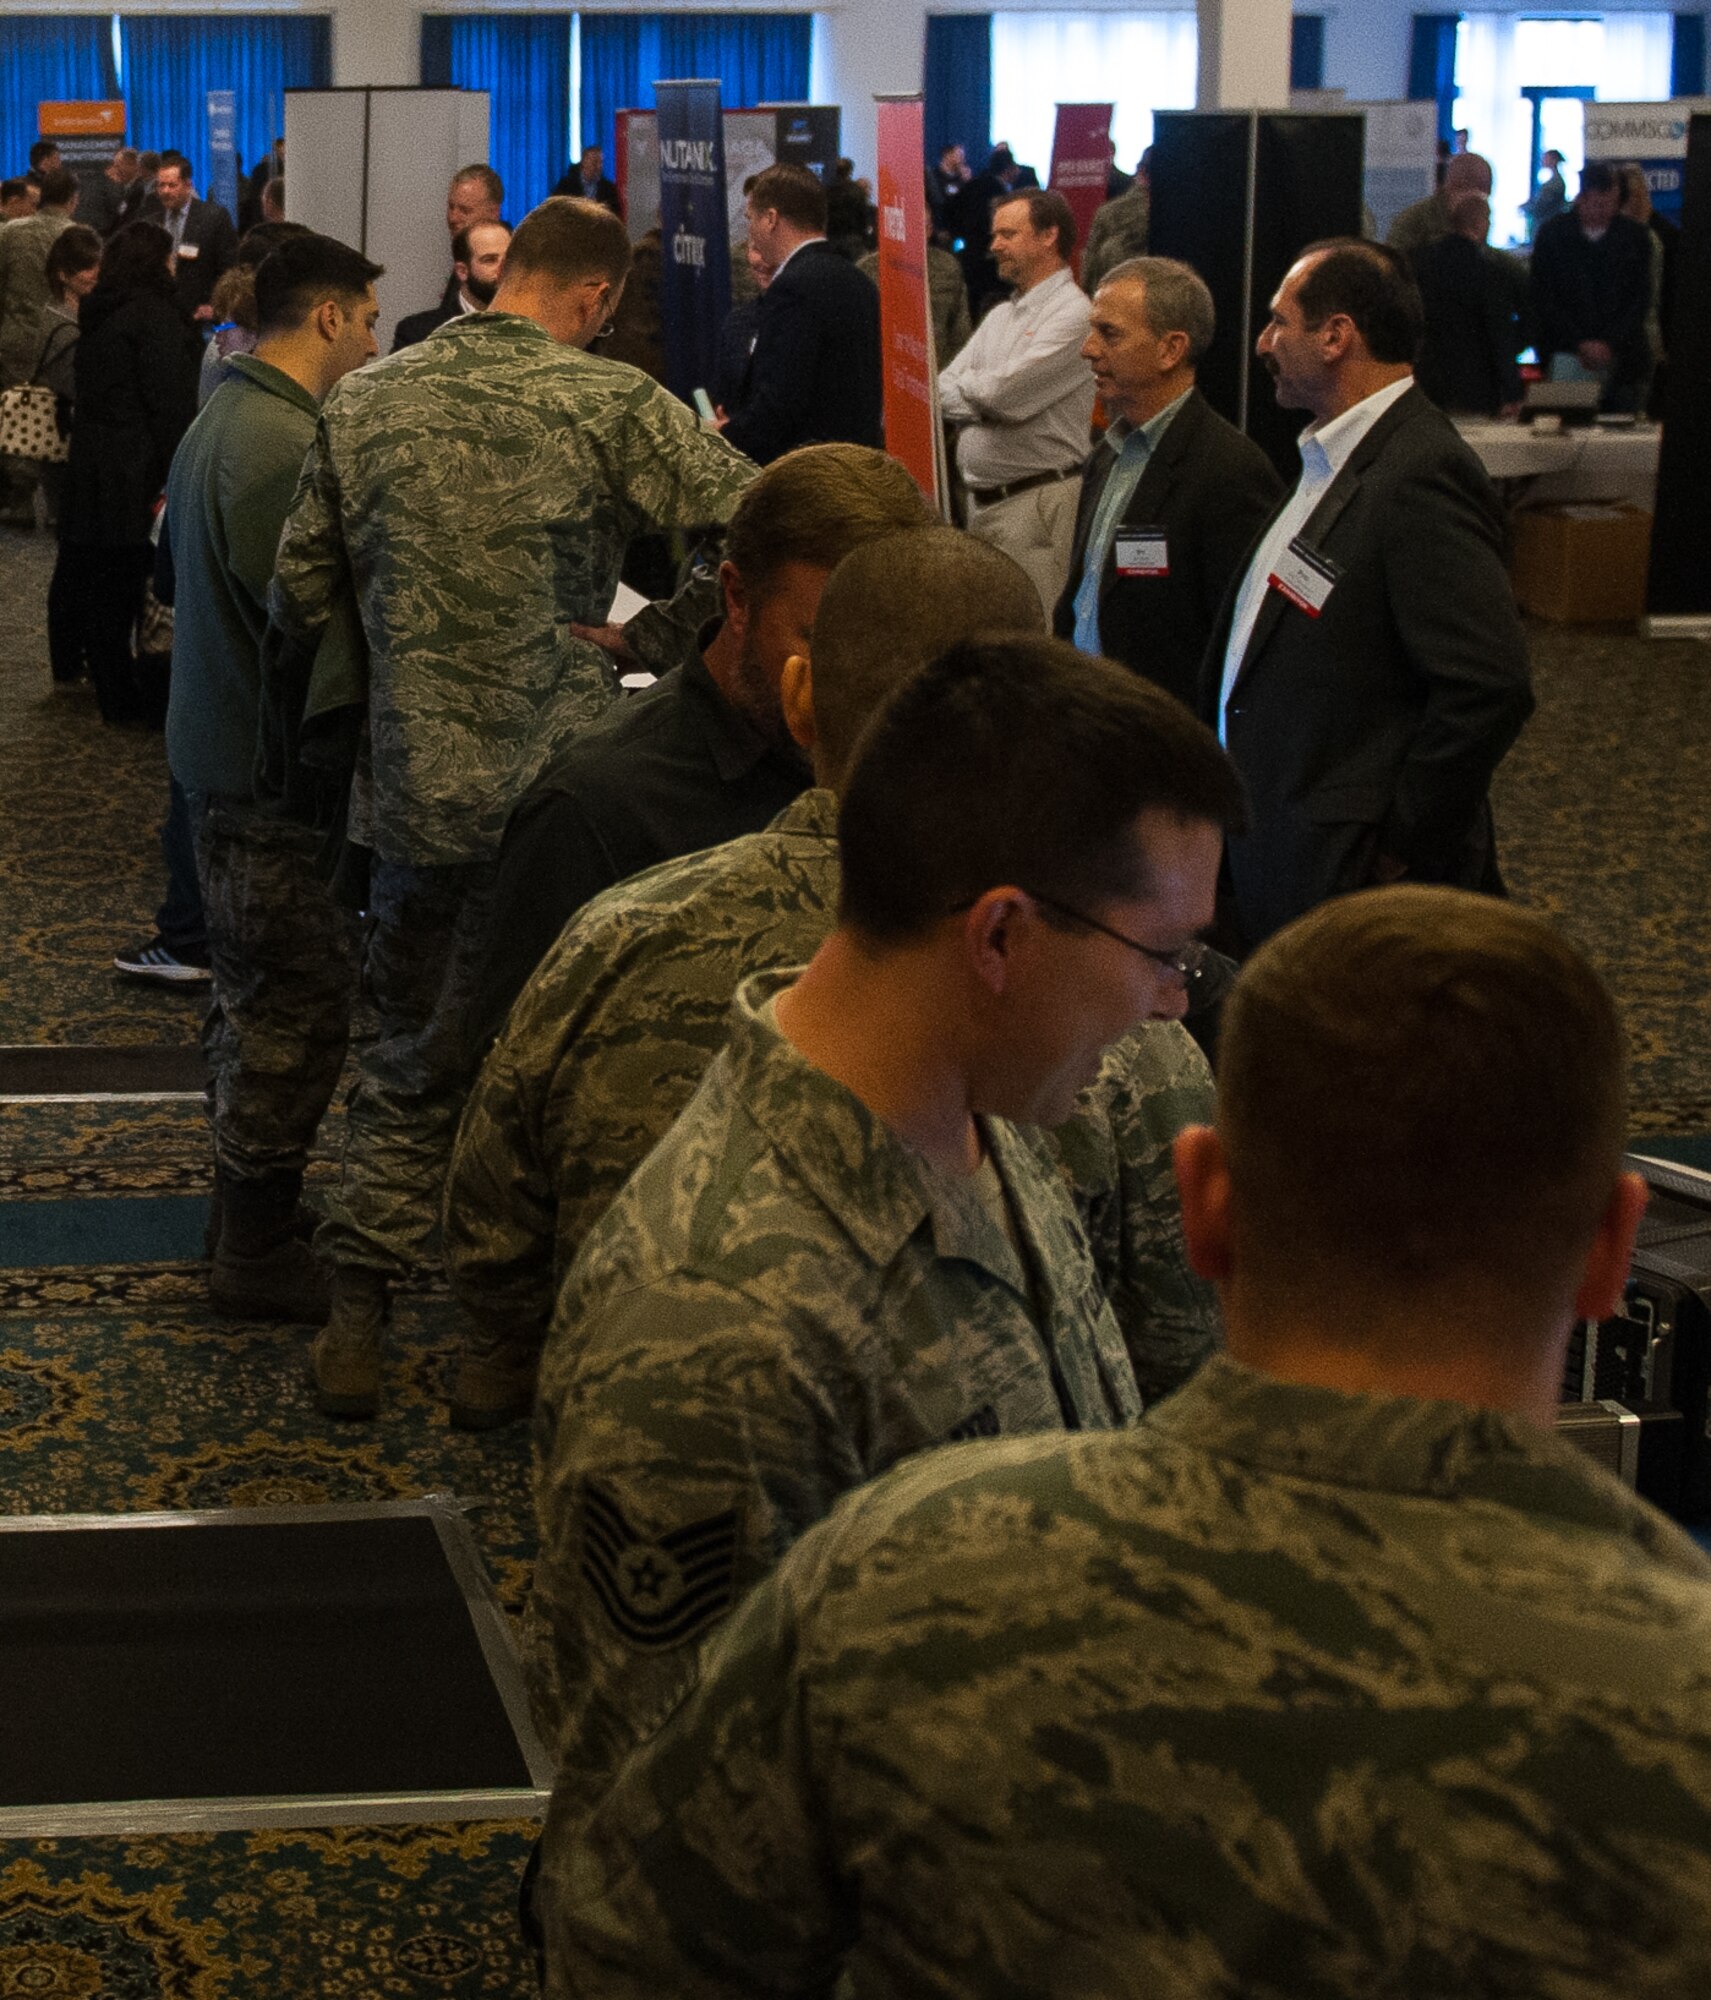 People attend the 2017 Winter Ramstien Tech Expo at Ramstein Air Base, Germany, Feb. 8, 2017. The event was put on by the Armed Forces Communications and Electronics Association, a non-profit international organization which seeks to develop networks between people involved in science, technology, engineering and mathematics by creating a medium for the ethical exchange of information. (U.S. Air Force photo by Senior Airman Lane T. Plummer)